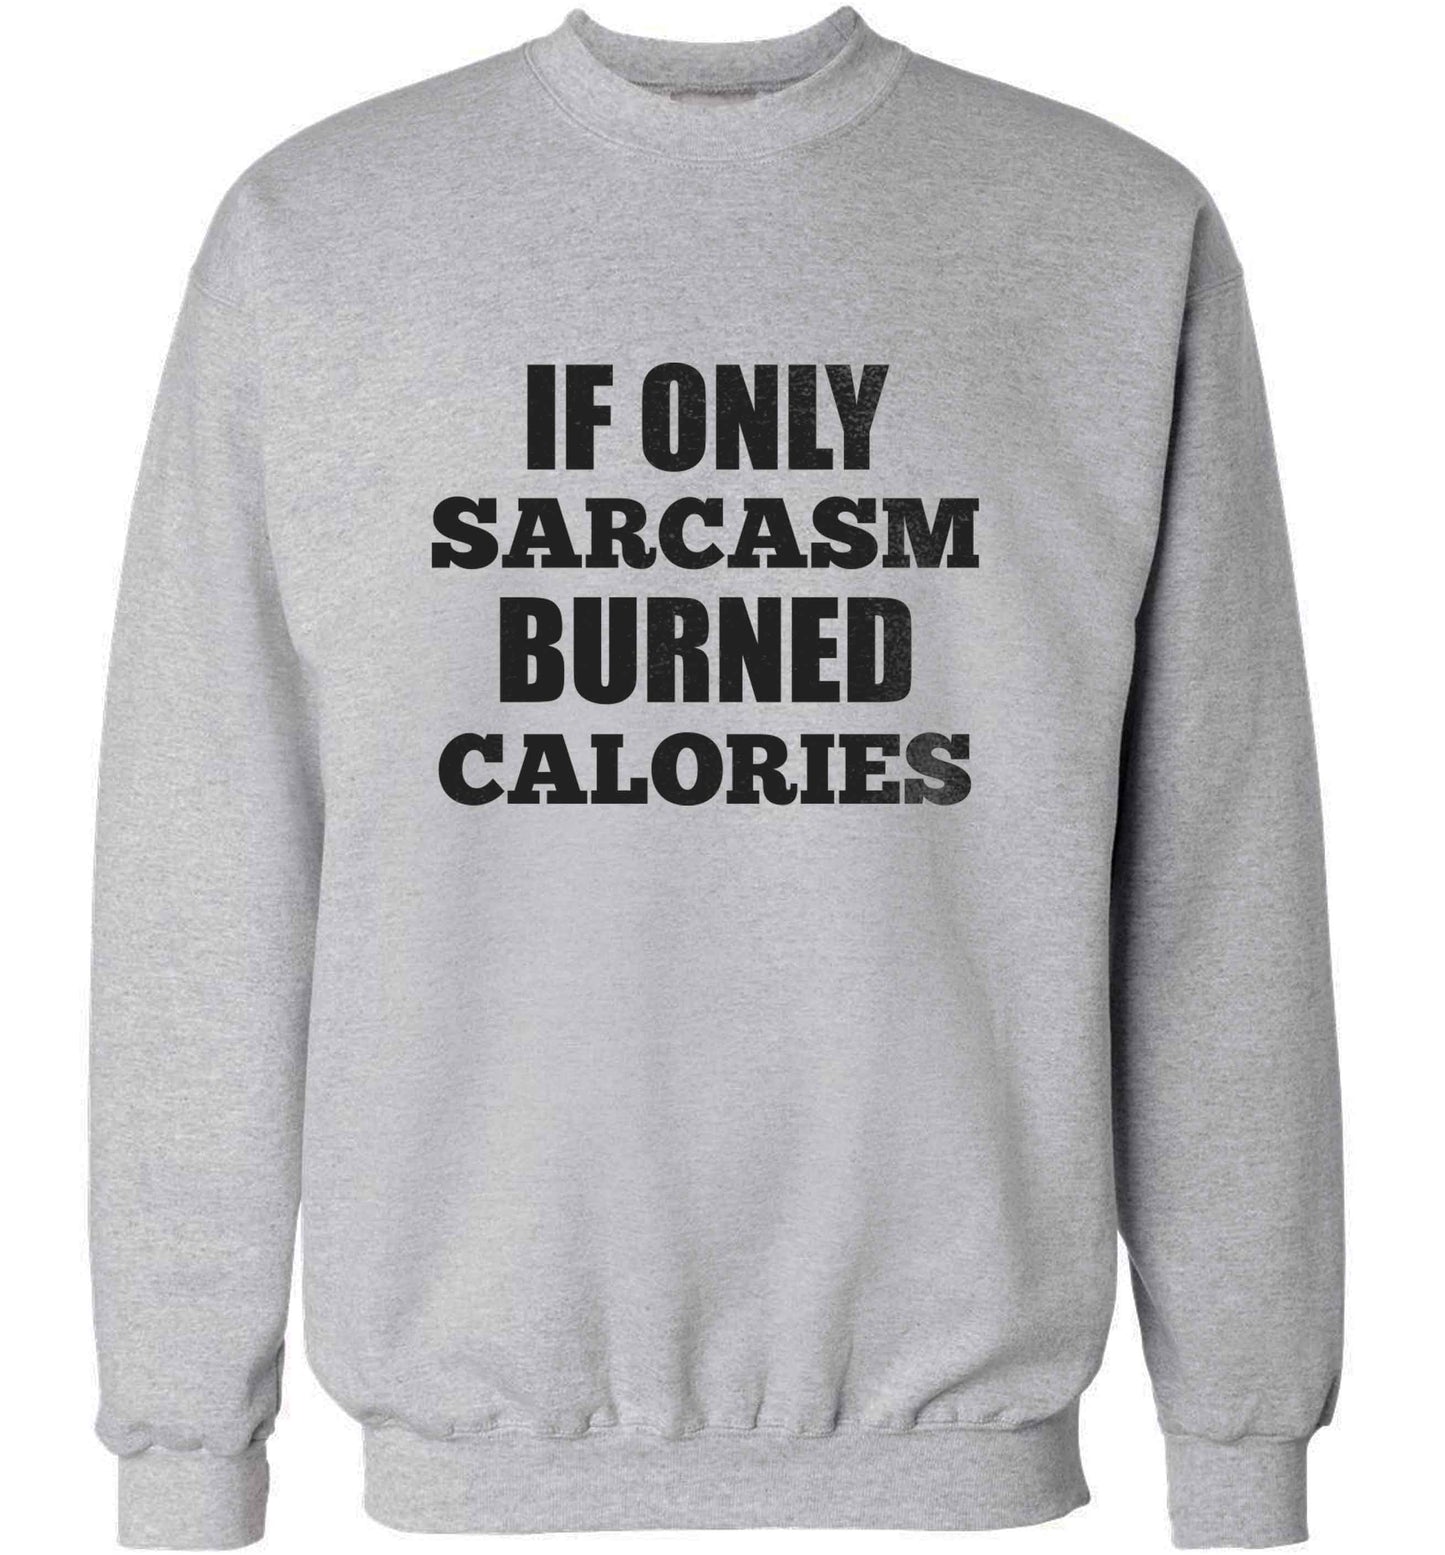 If only sarcasm burned calories adult's unisex grey sweater 2XL